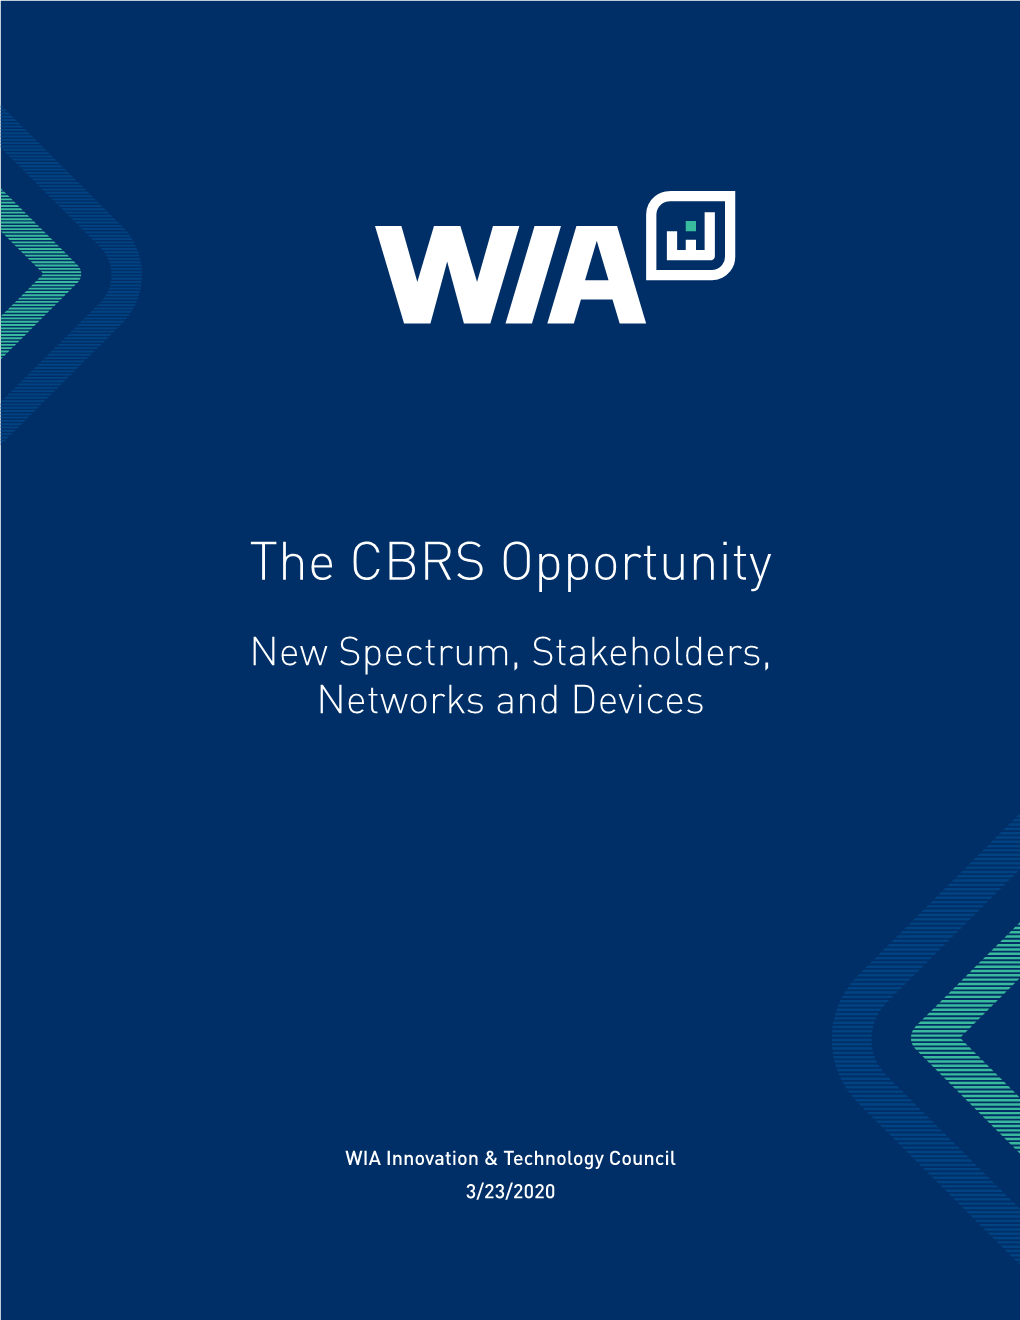 The CBRS Opportunity